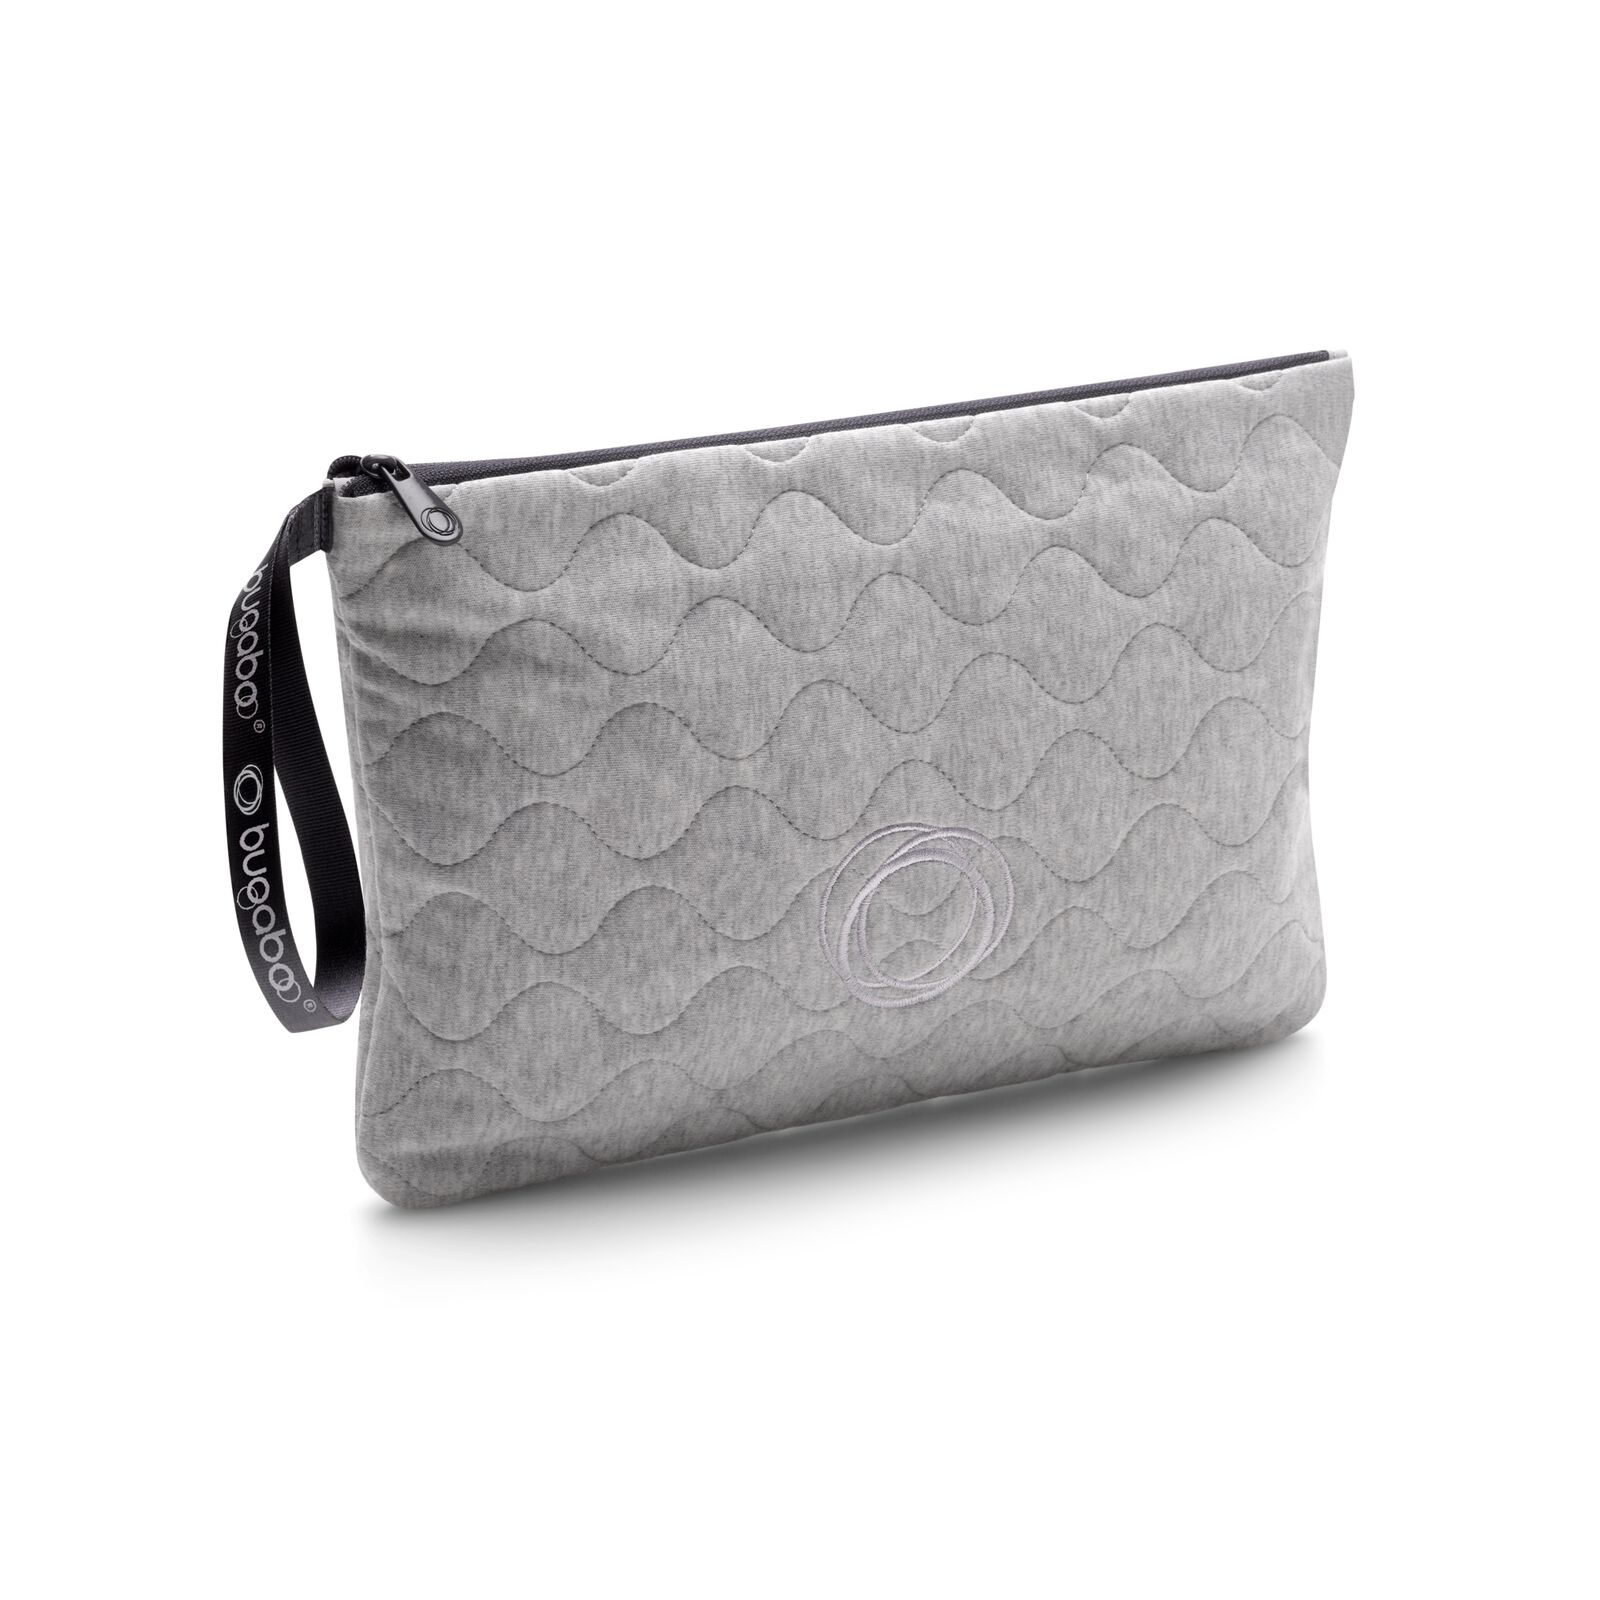 Bugaboo Wickelclutch - View 1